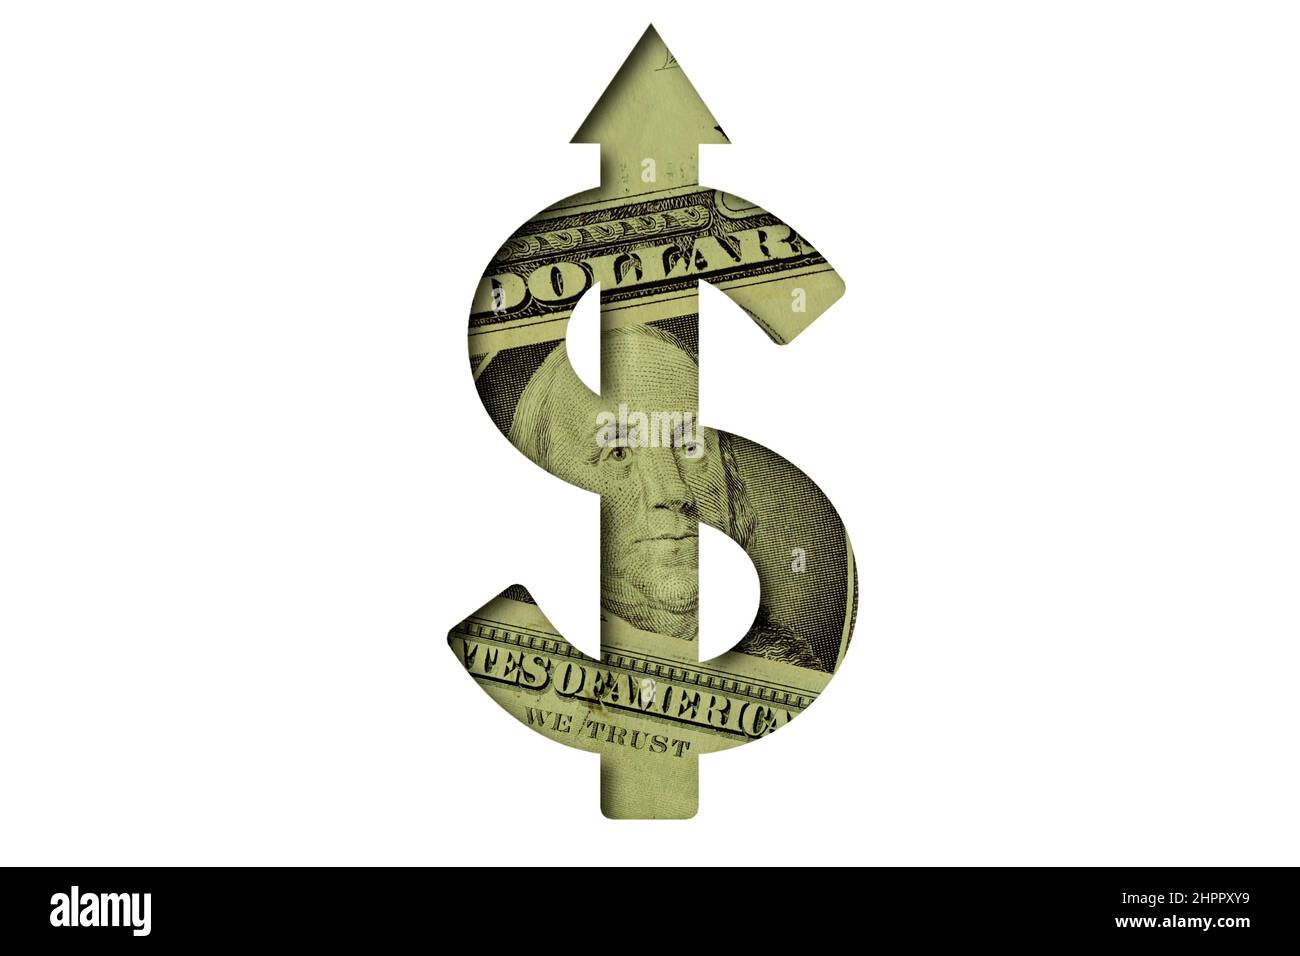 Dollar sign with upward arrow made of dollar banknotes on white background - Concept of growing and upward trend of dollar currency Stock Photo